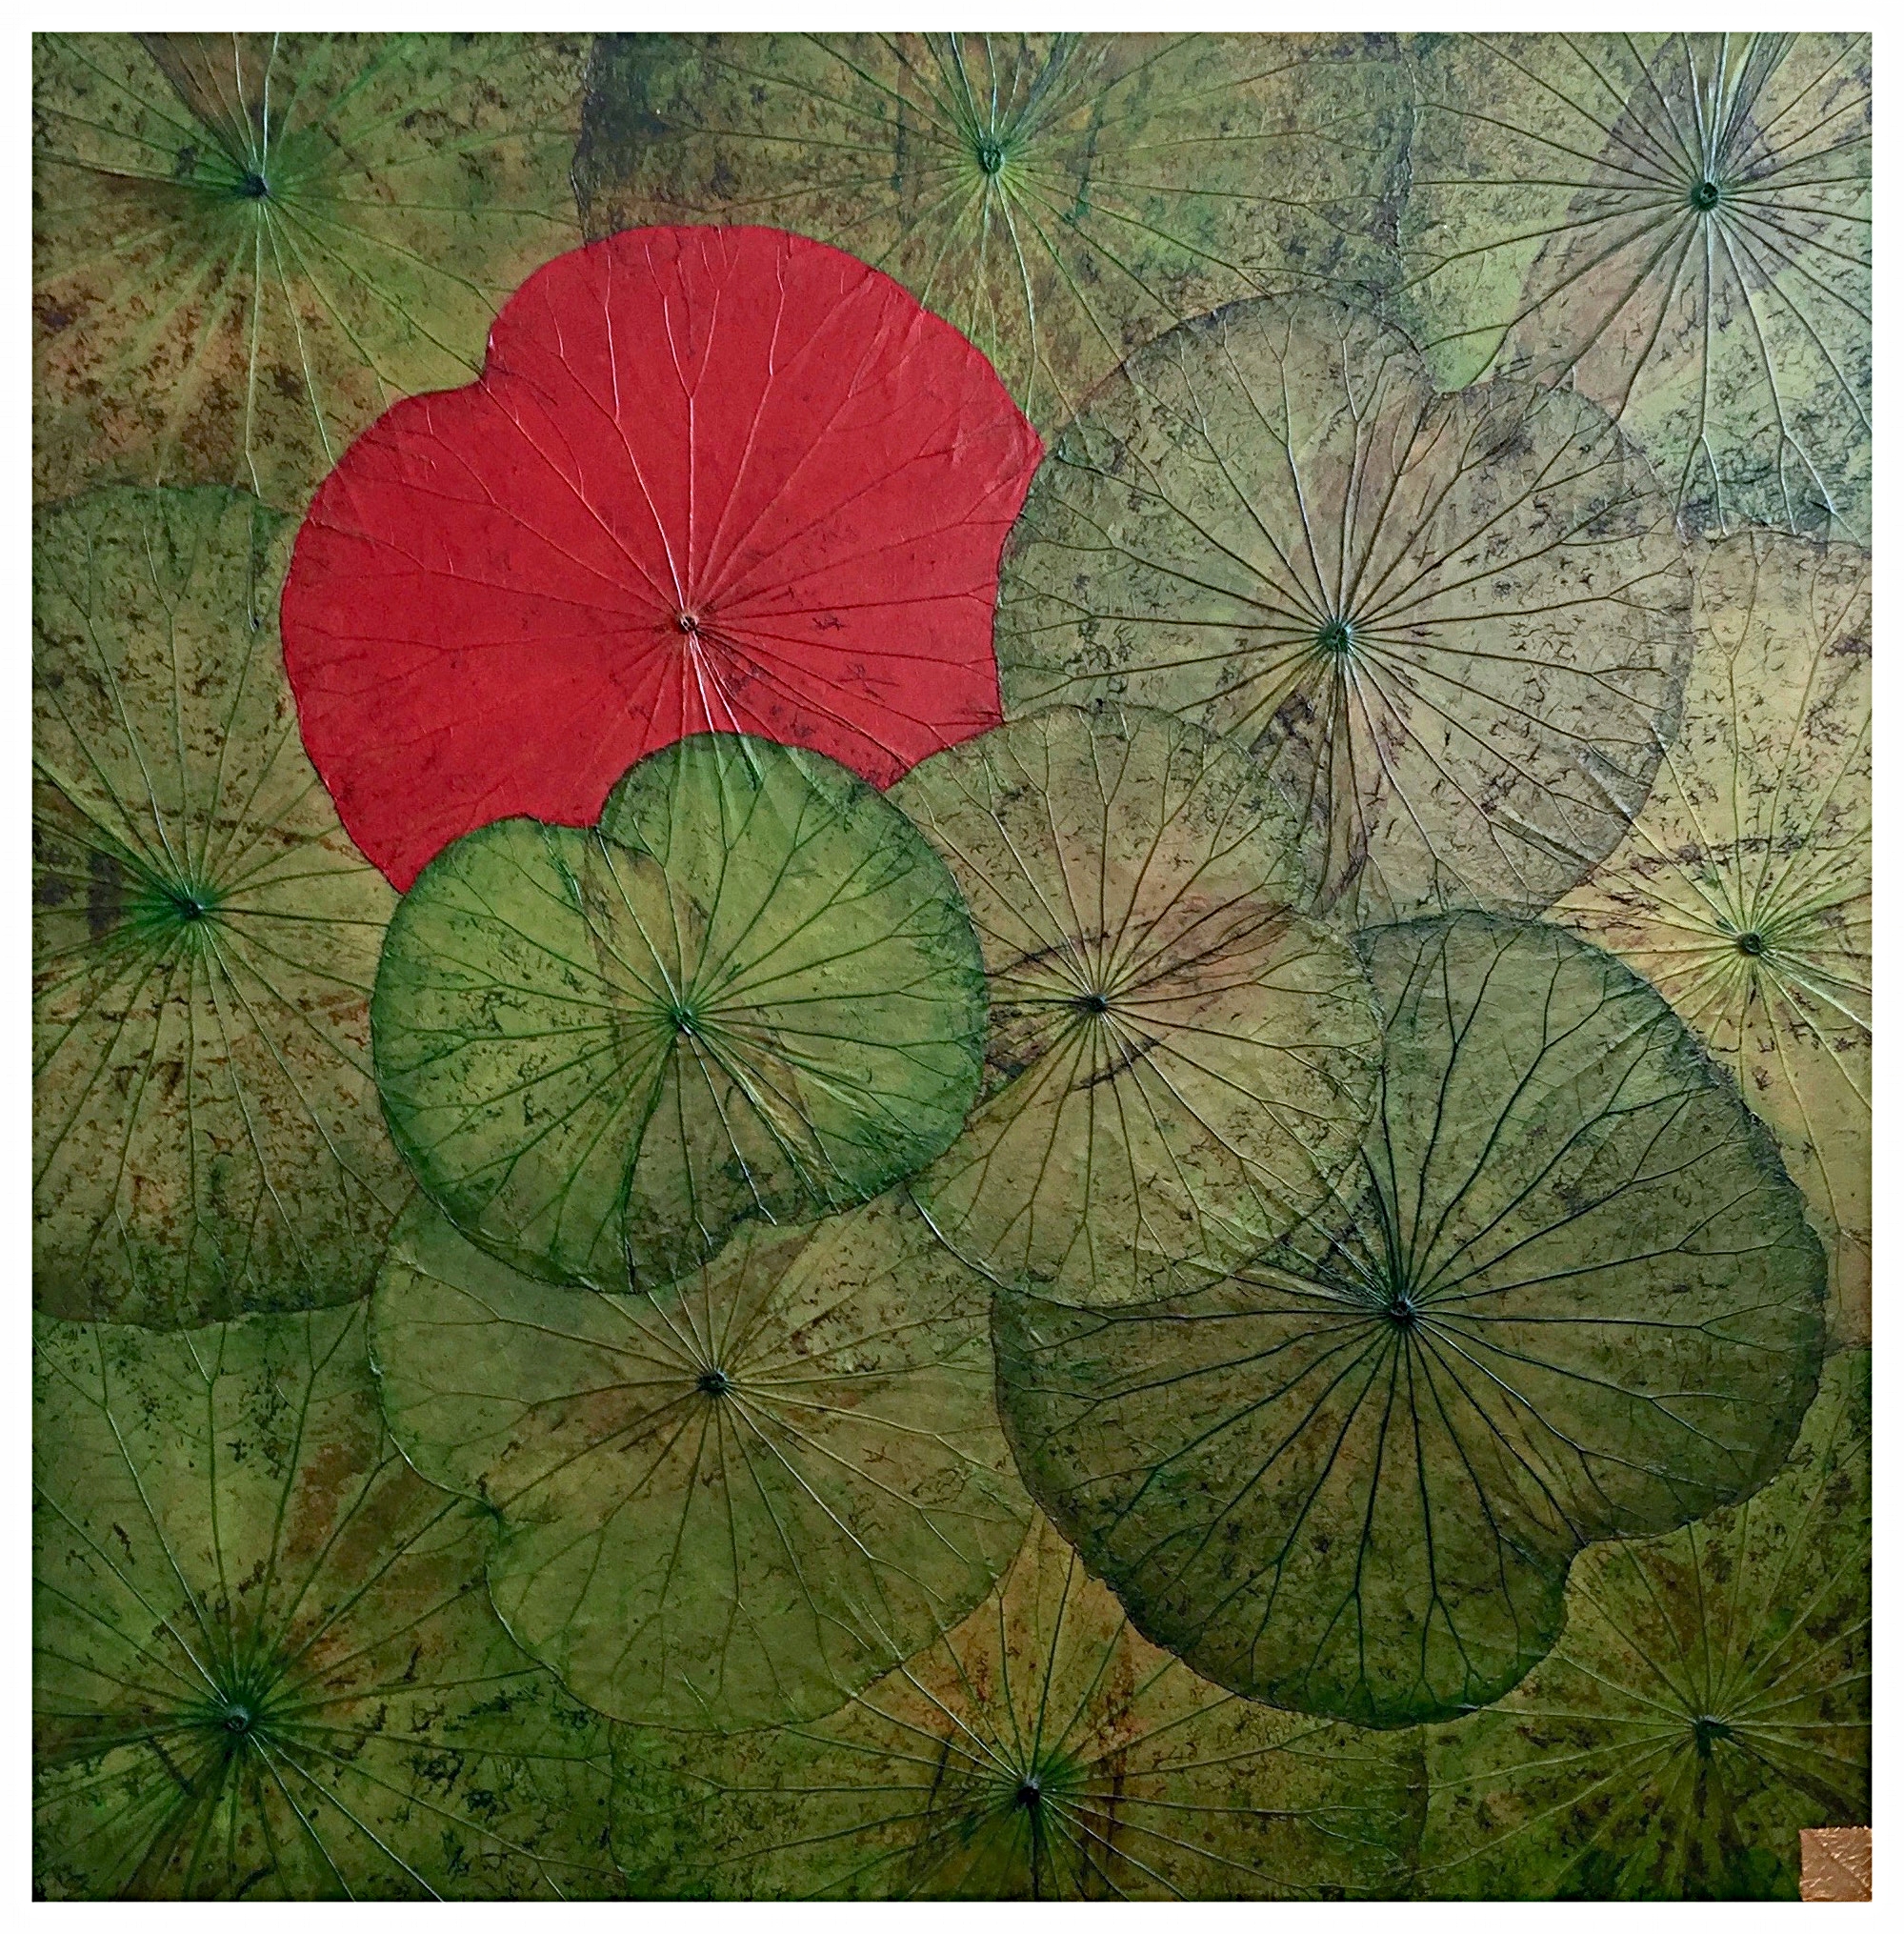 10 (Oct'15) 100x100 Green with Red Dot.jpg